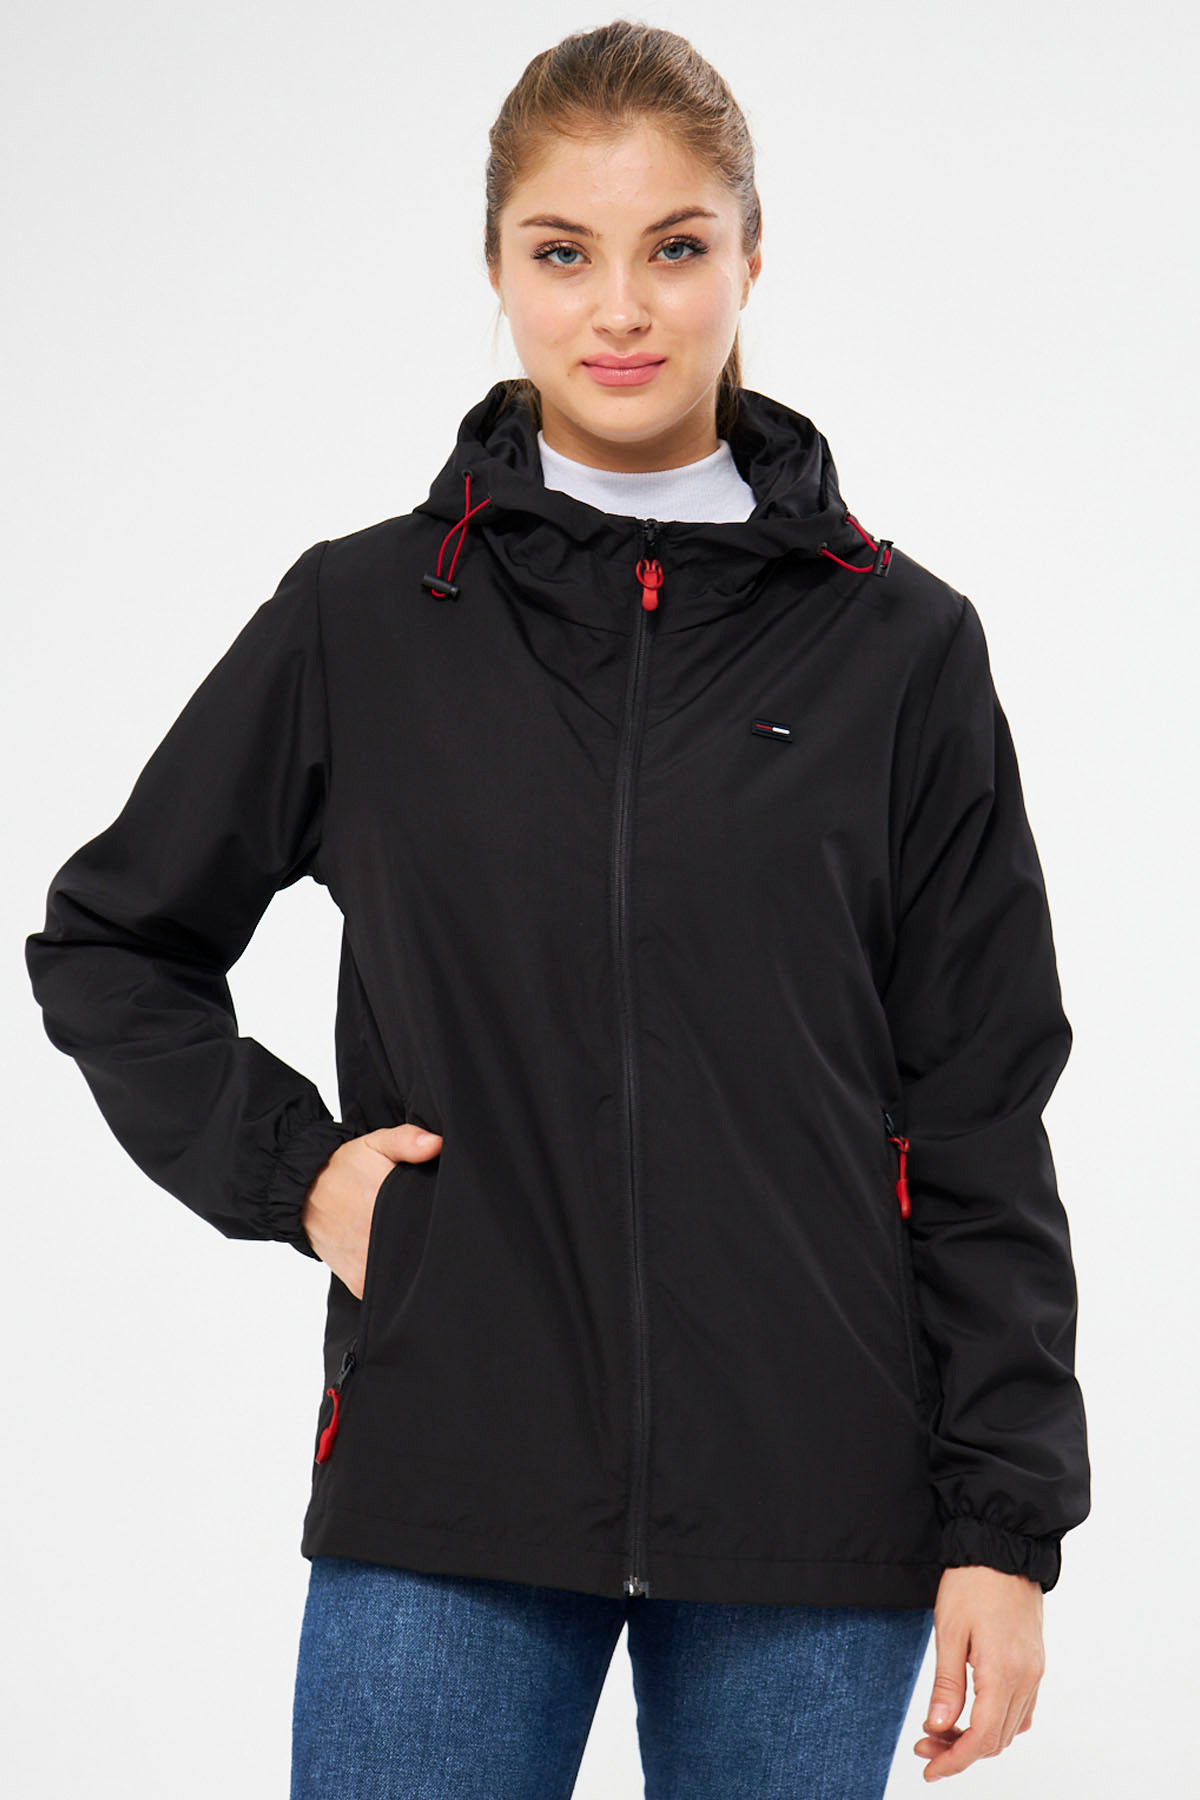 River Club Women's Black Inner Lined Waterproof And Windproof Hooded Raincoat With Pocket.